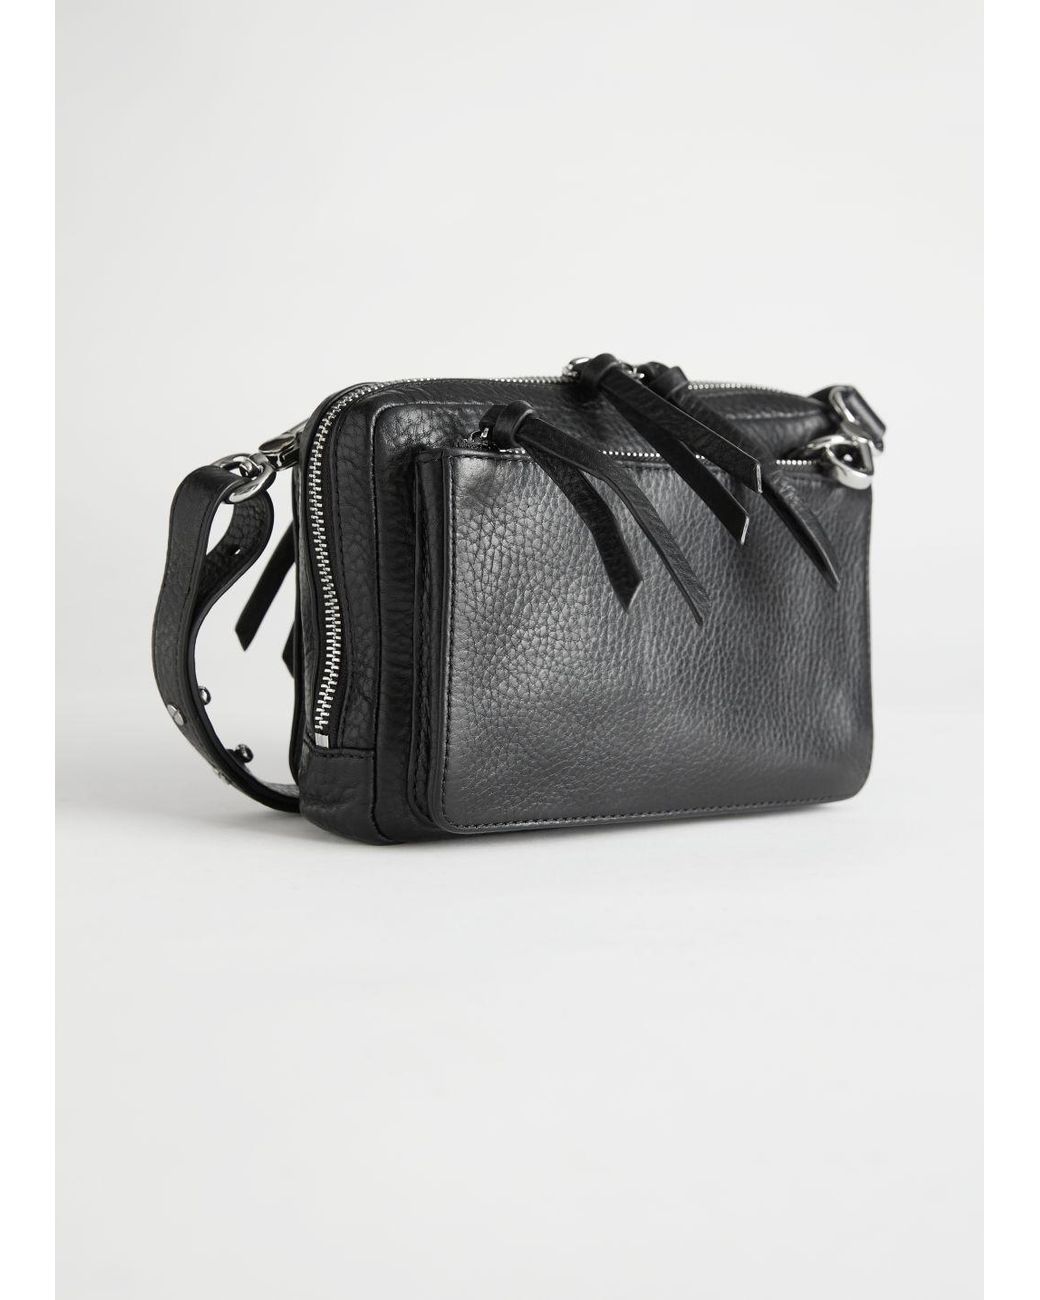  Other Stories geometric braided leather crossbody bag in black